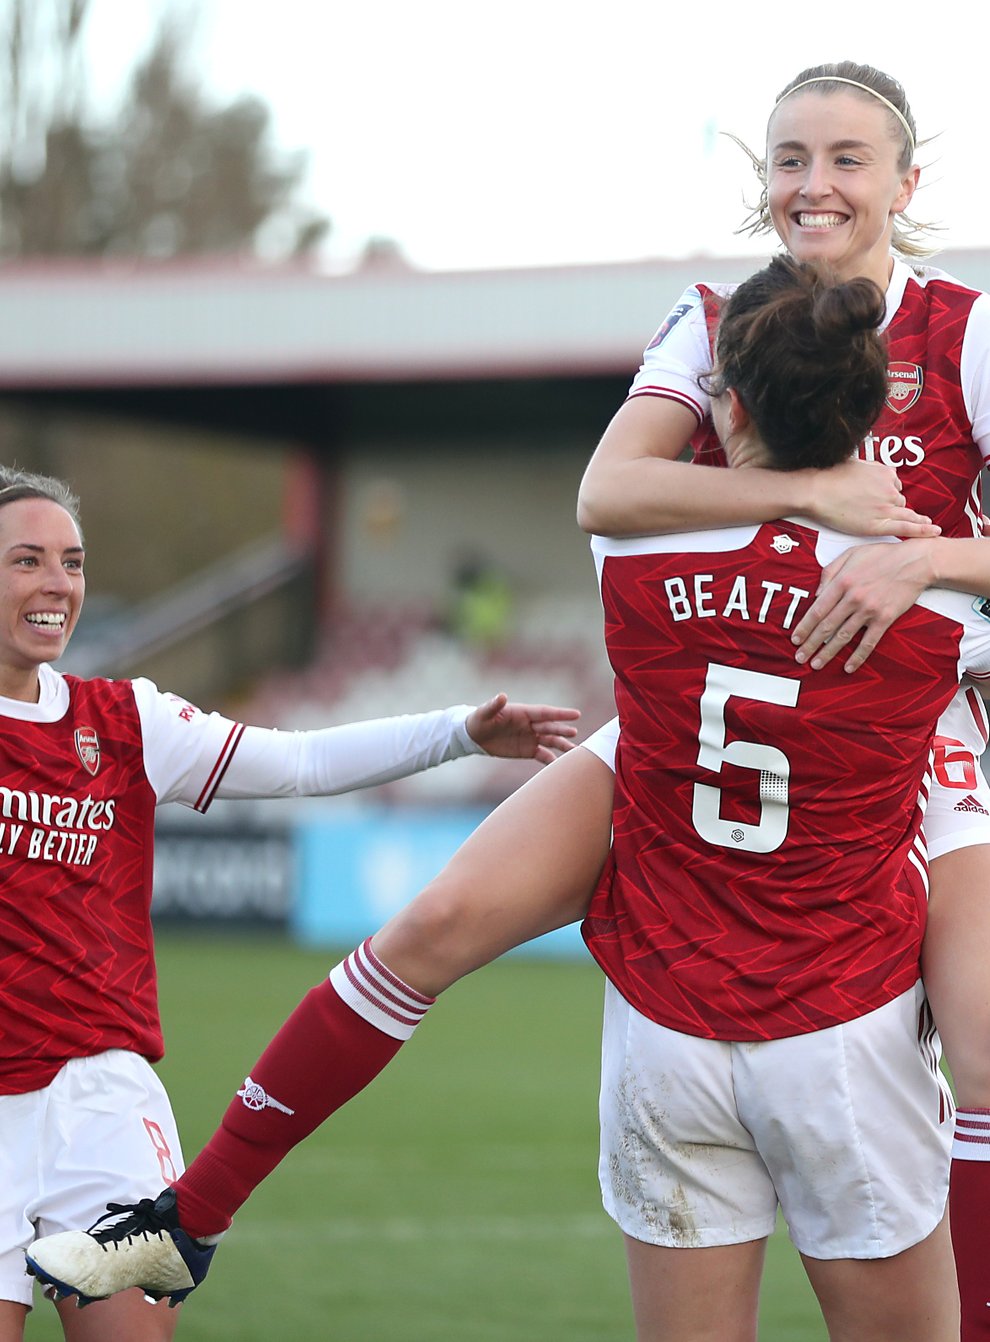 Arsenal have gone second in the WSL